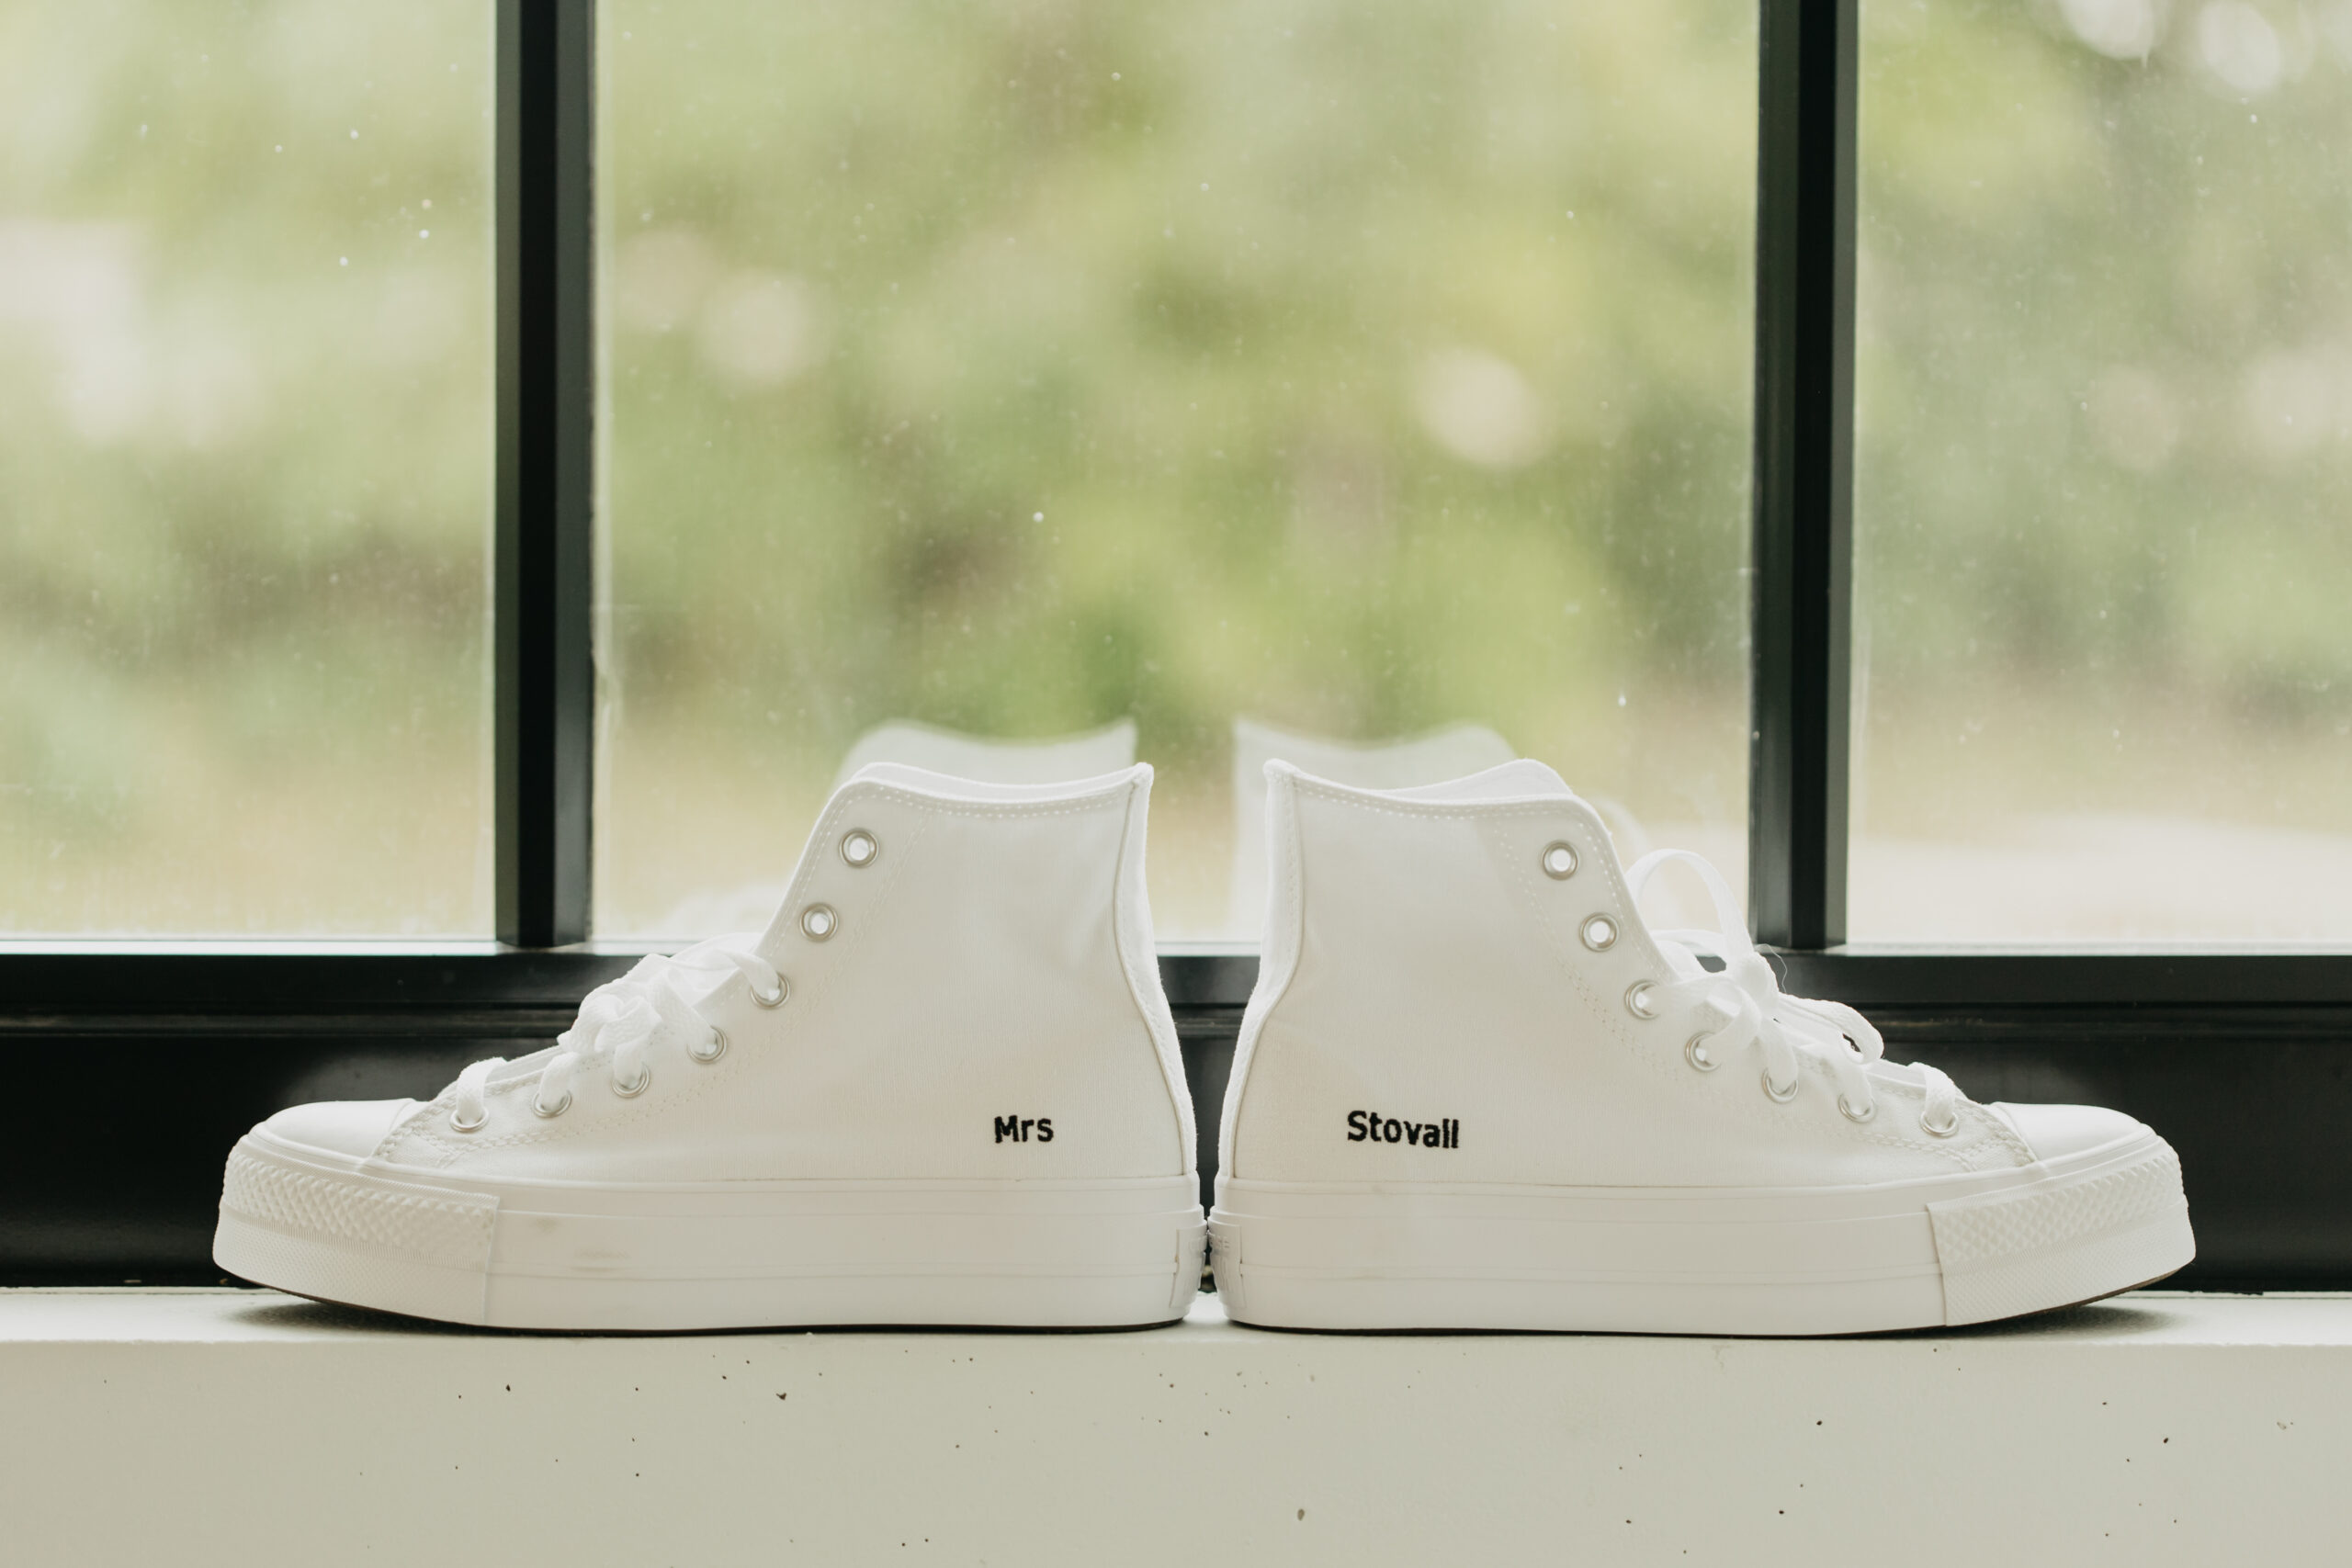 Customized sneakers -details for wedding